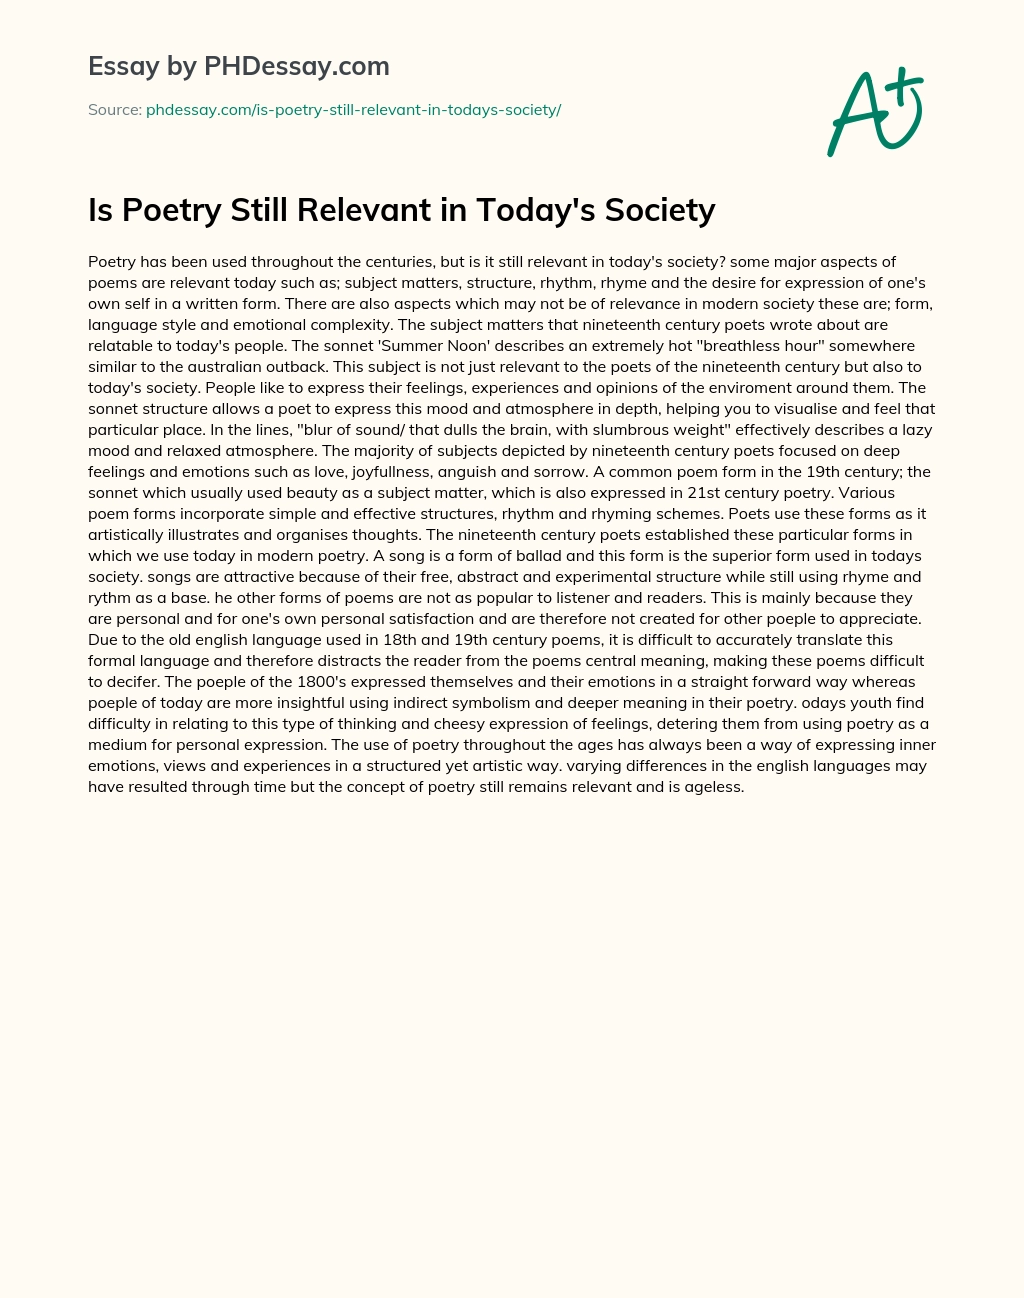 Is Poetry Still Relevant in Today’s Society essay